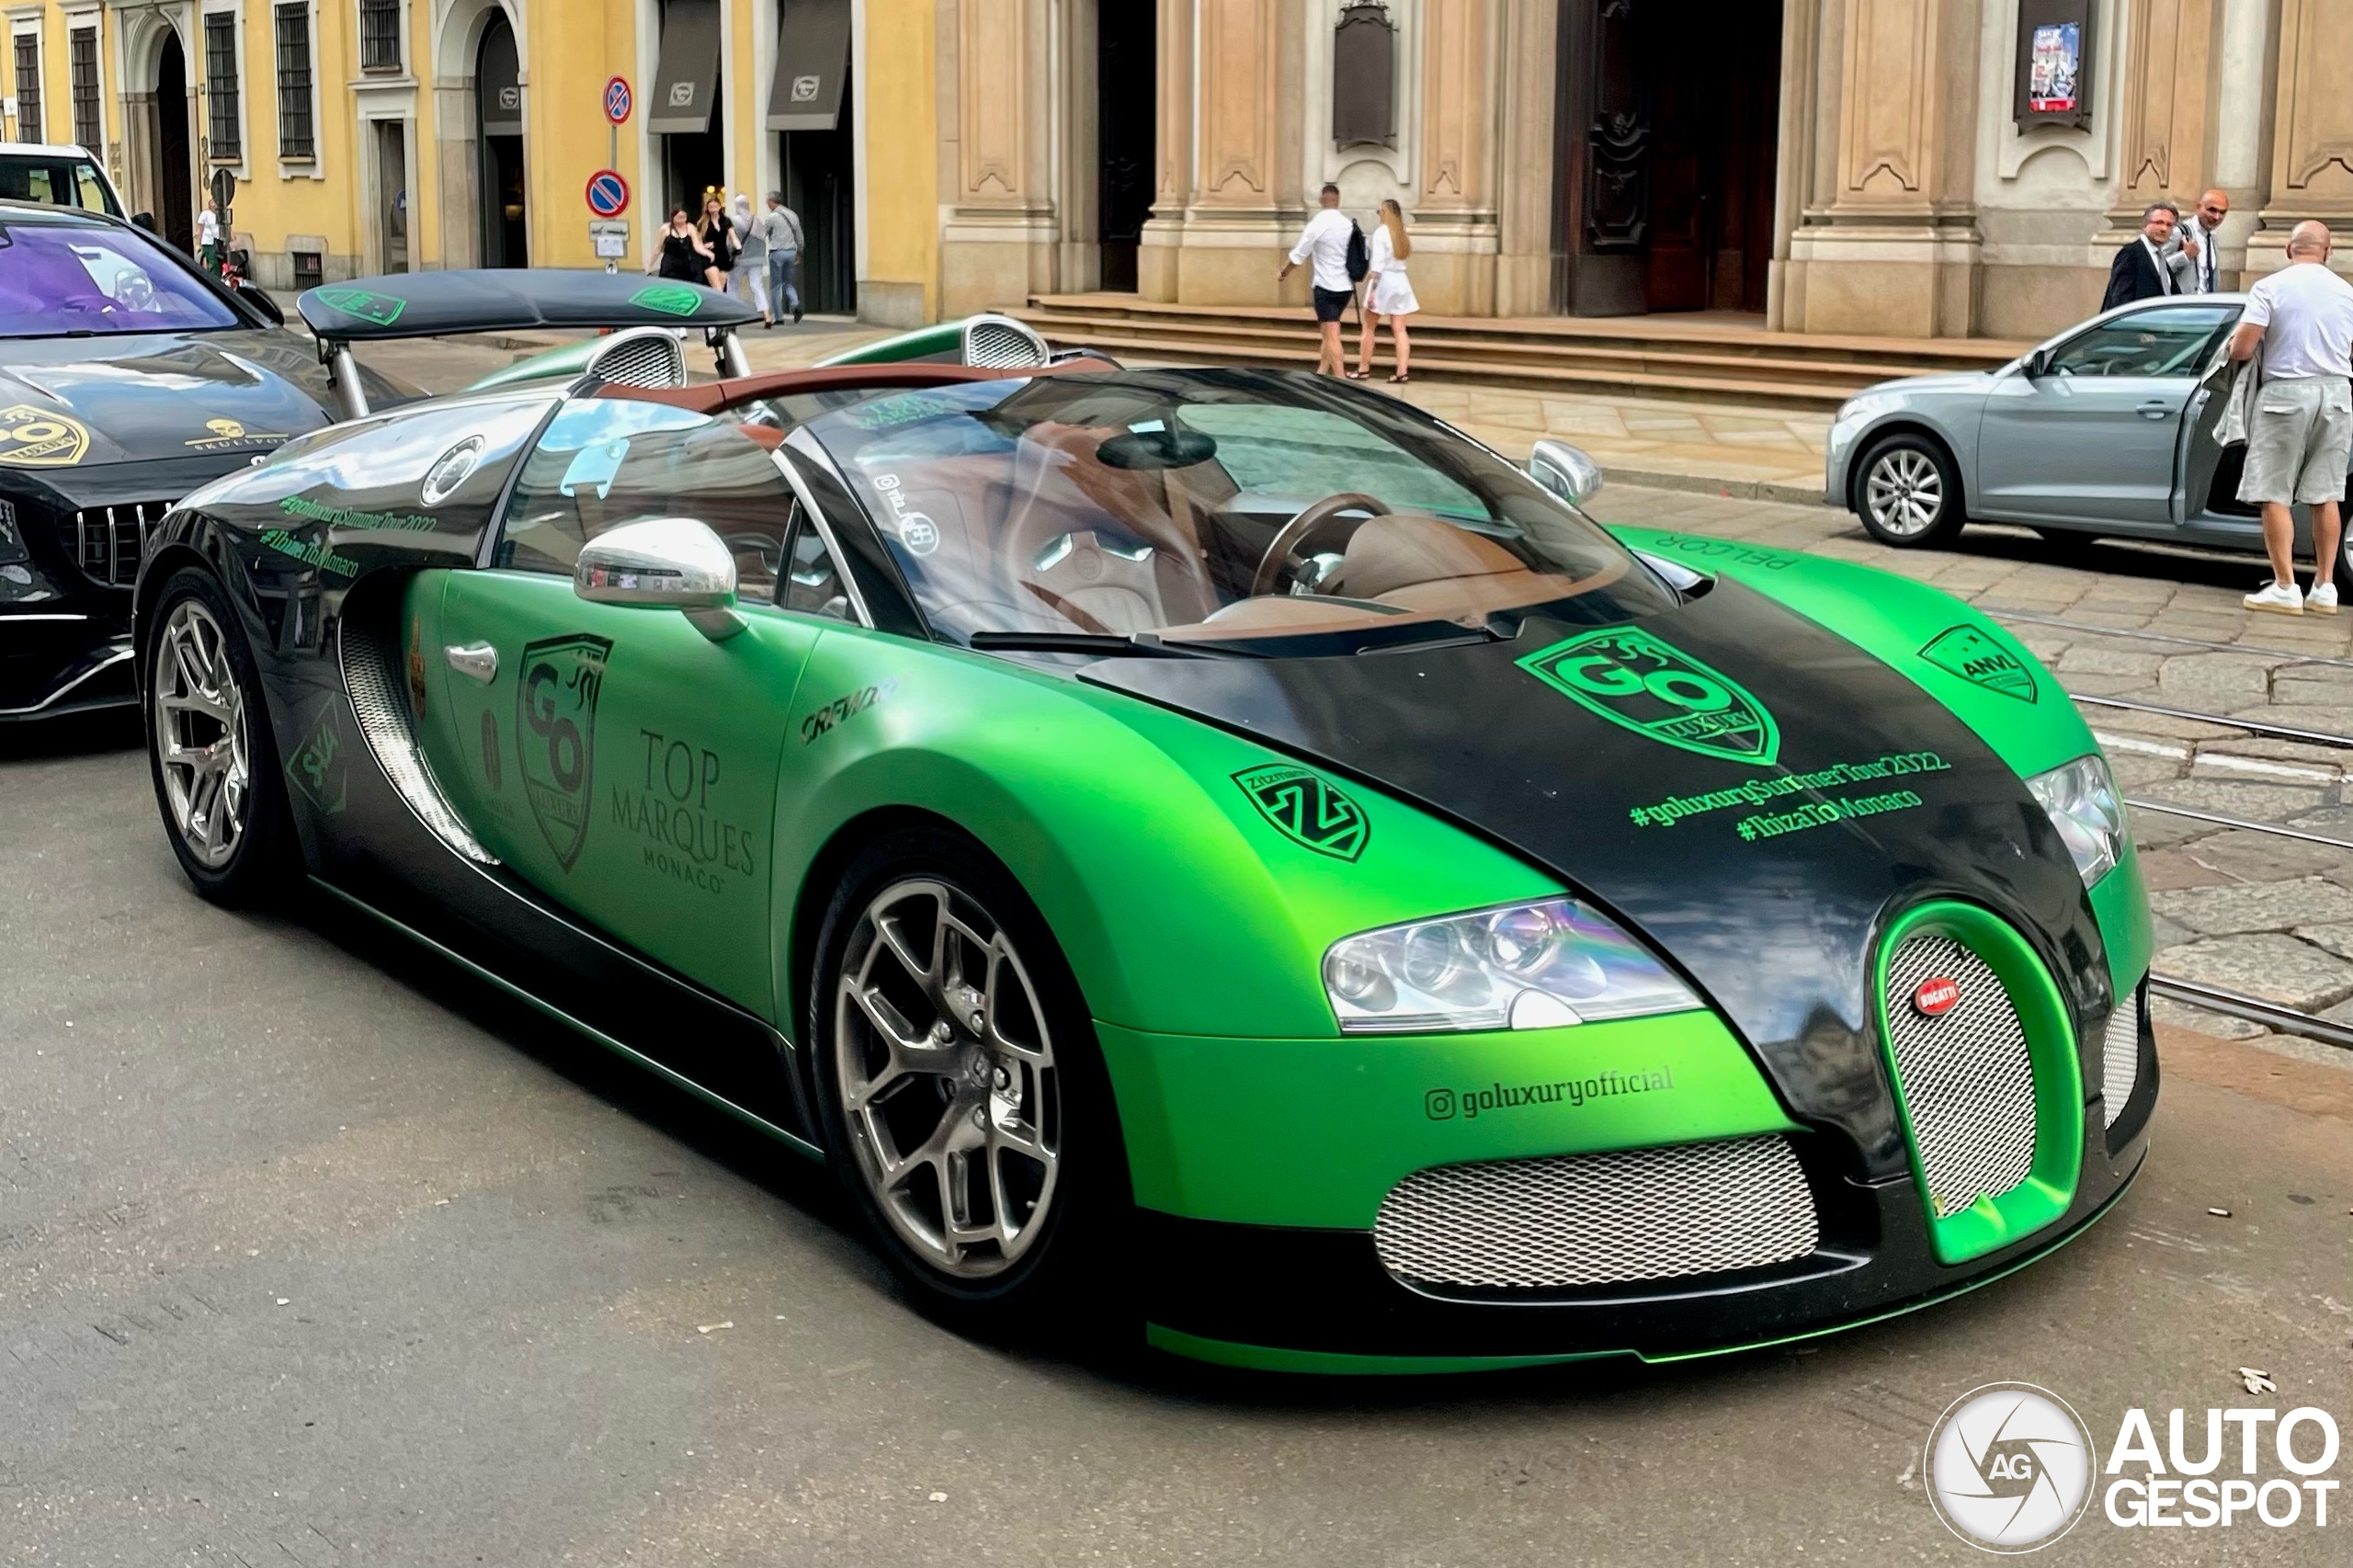 Is this the ugliest Veyron